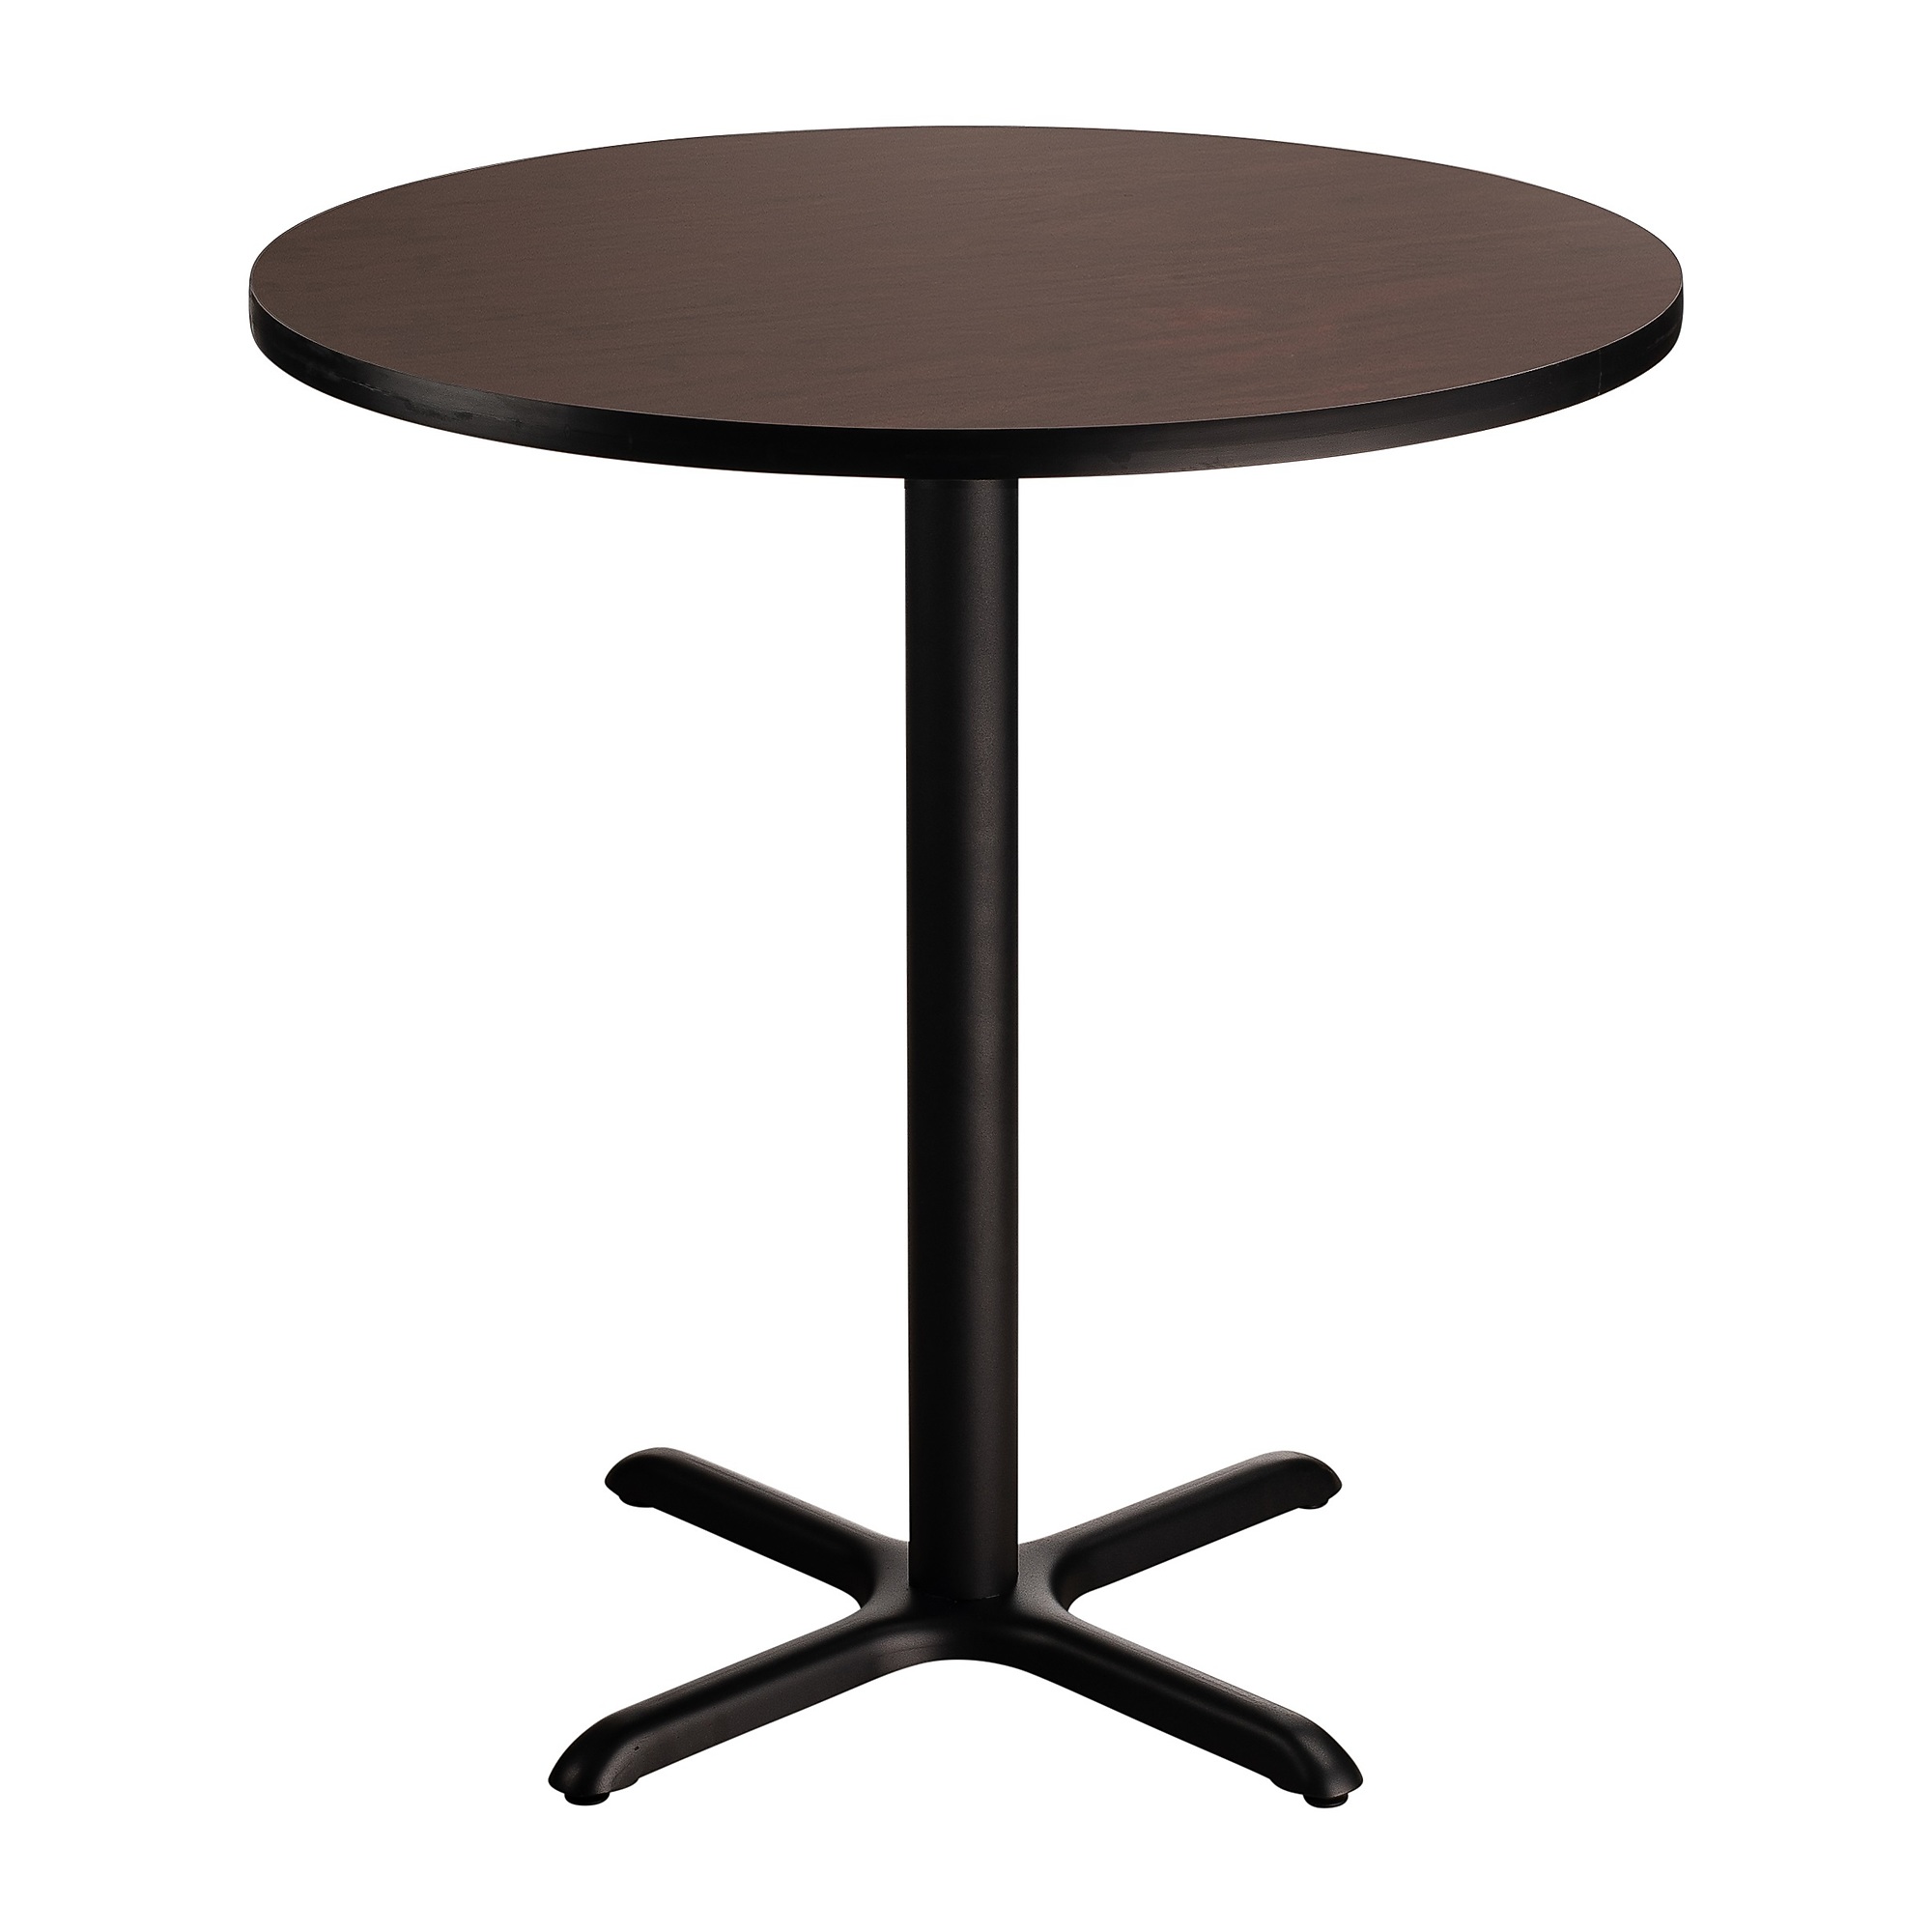 "National Public Seating, Cafe Table, 36x36x36 Round ""X"" Base, Height 36 in, Model CT13636XCPBTMMY"